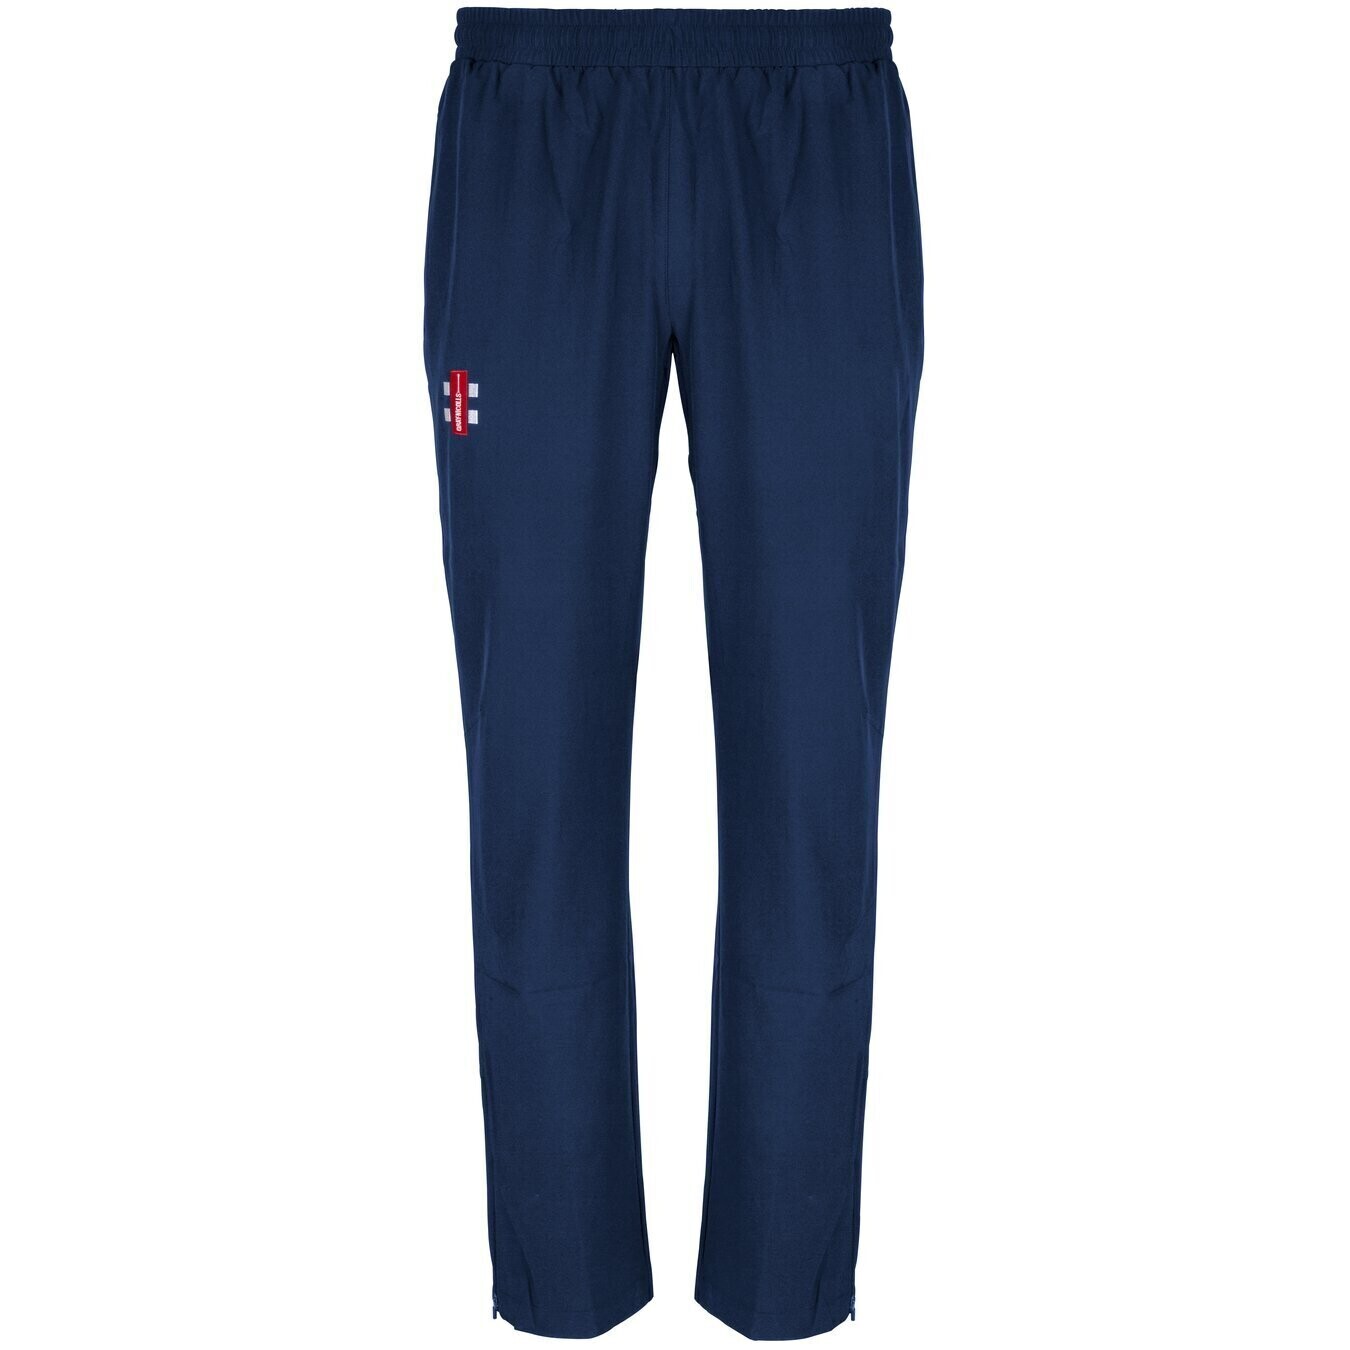 Redcar Velocity Training Trousers